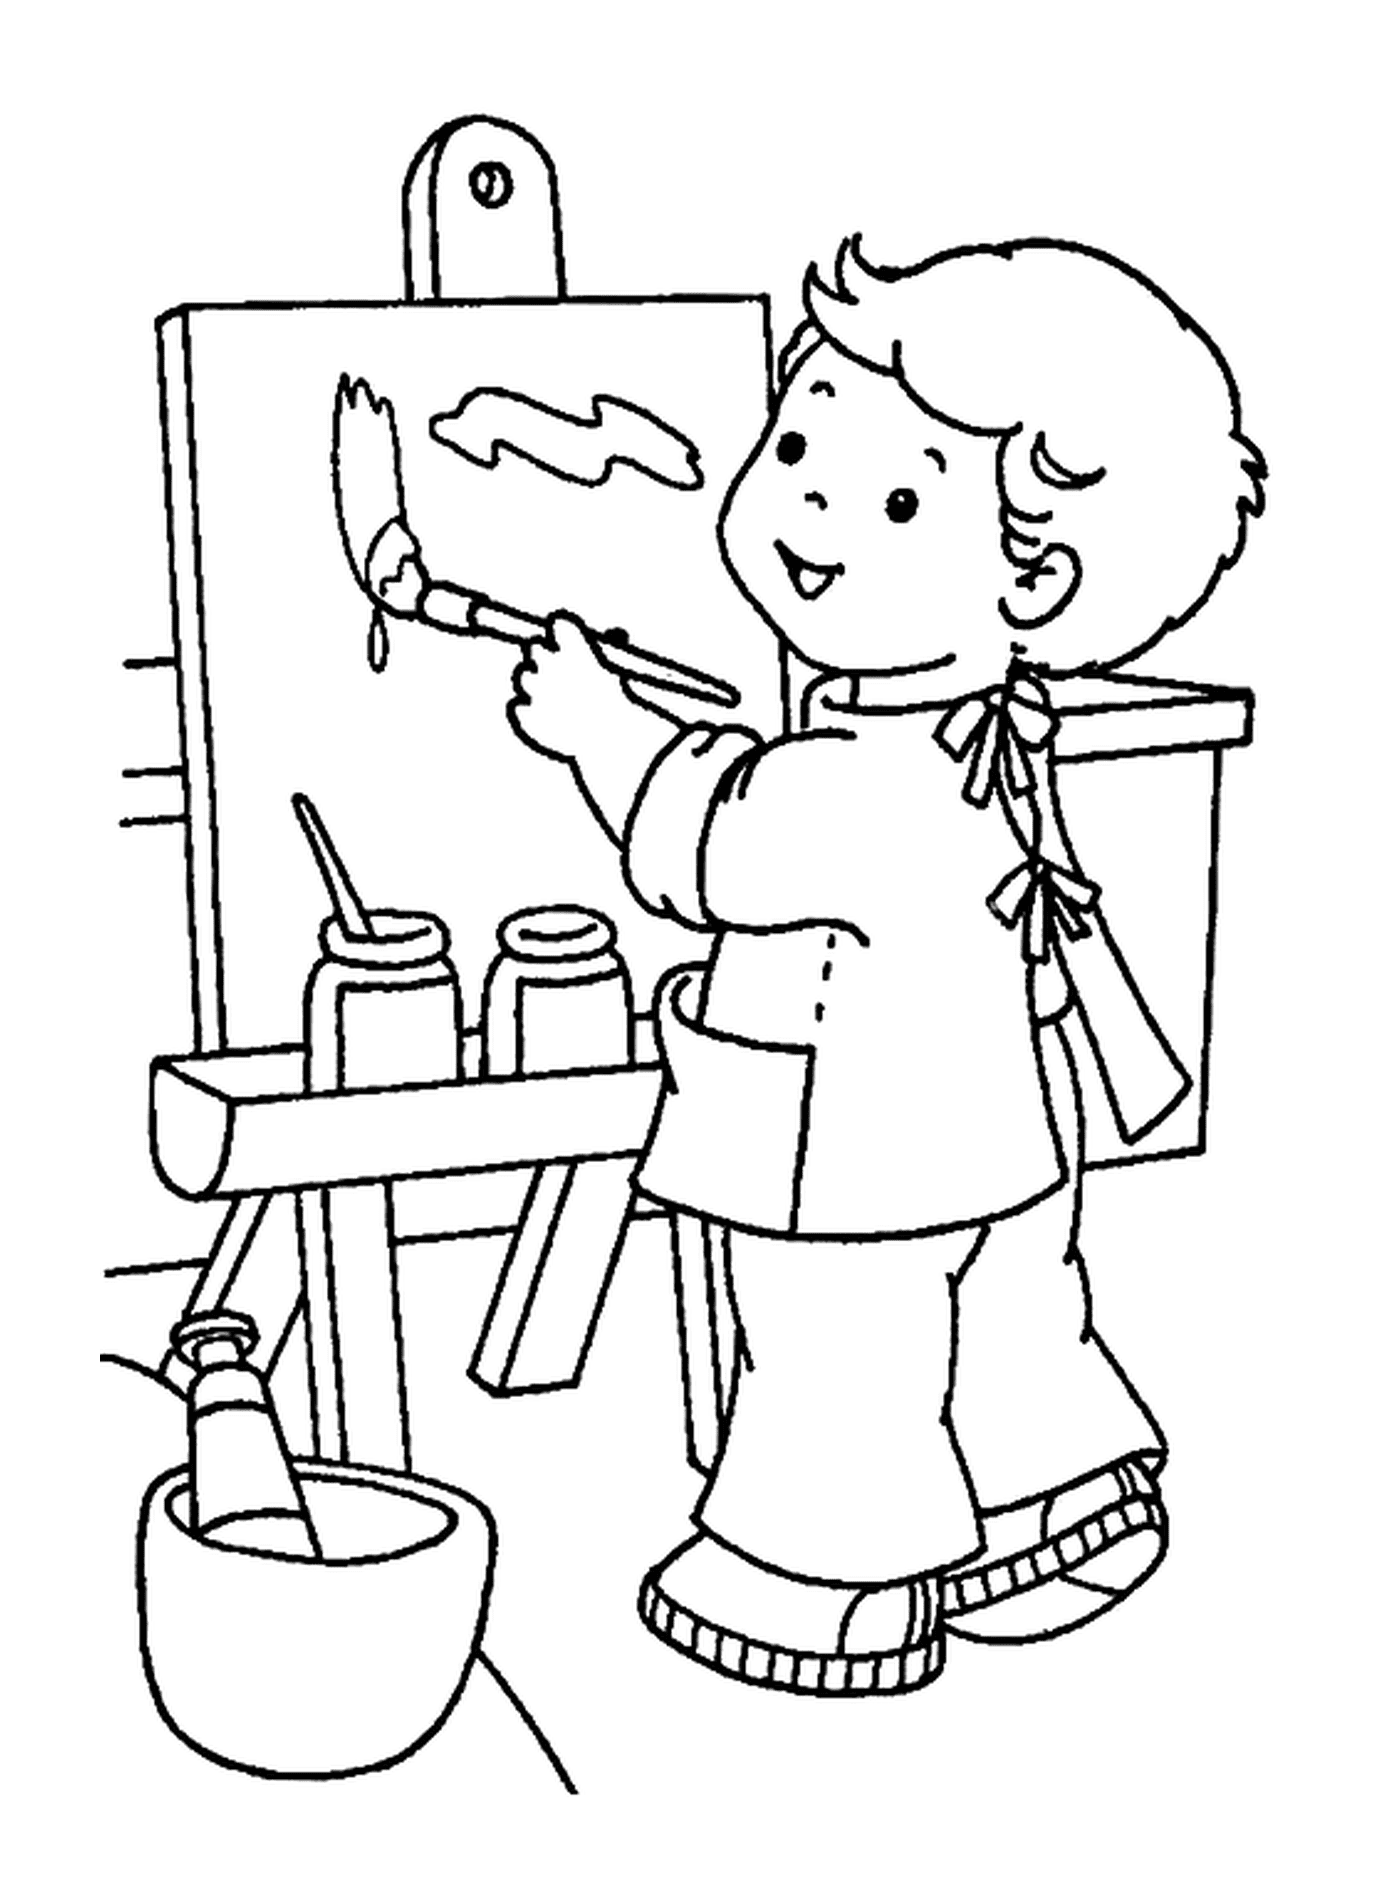  A little boy painting at school 